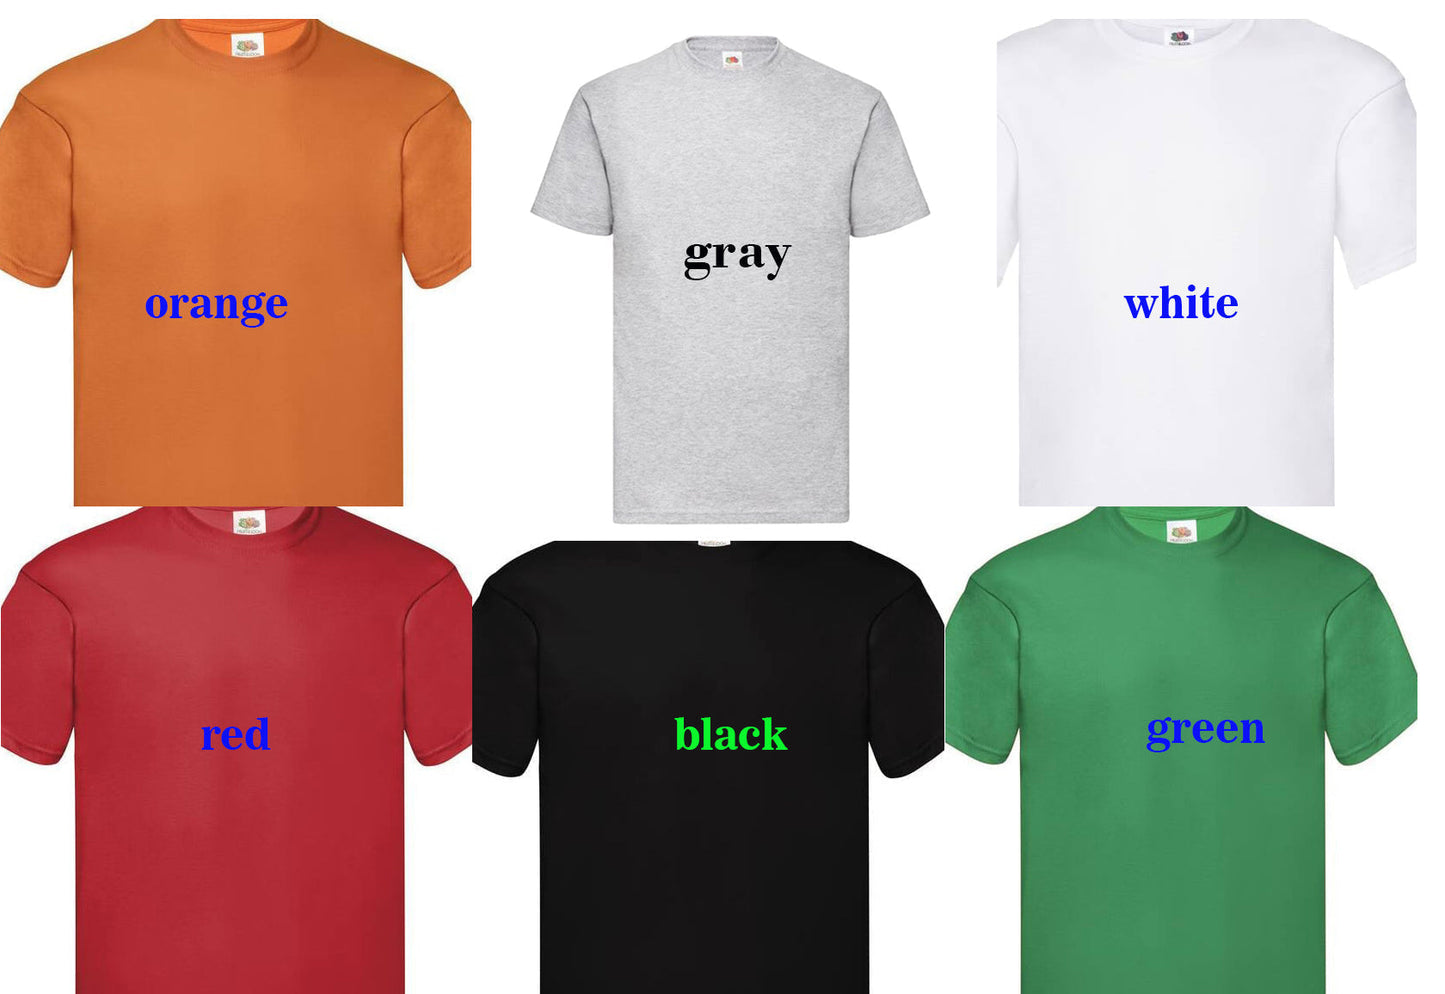 092. CRAZY FACE, Personalized T-Shirt, Custom Text, Make Your Own Shirt, Custom Tee